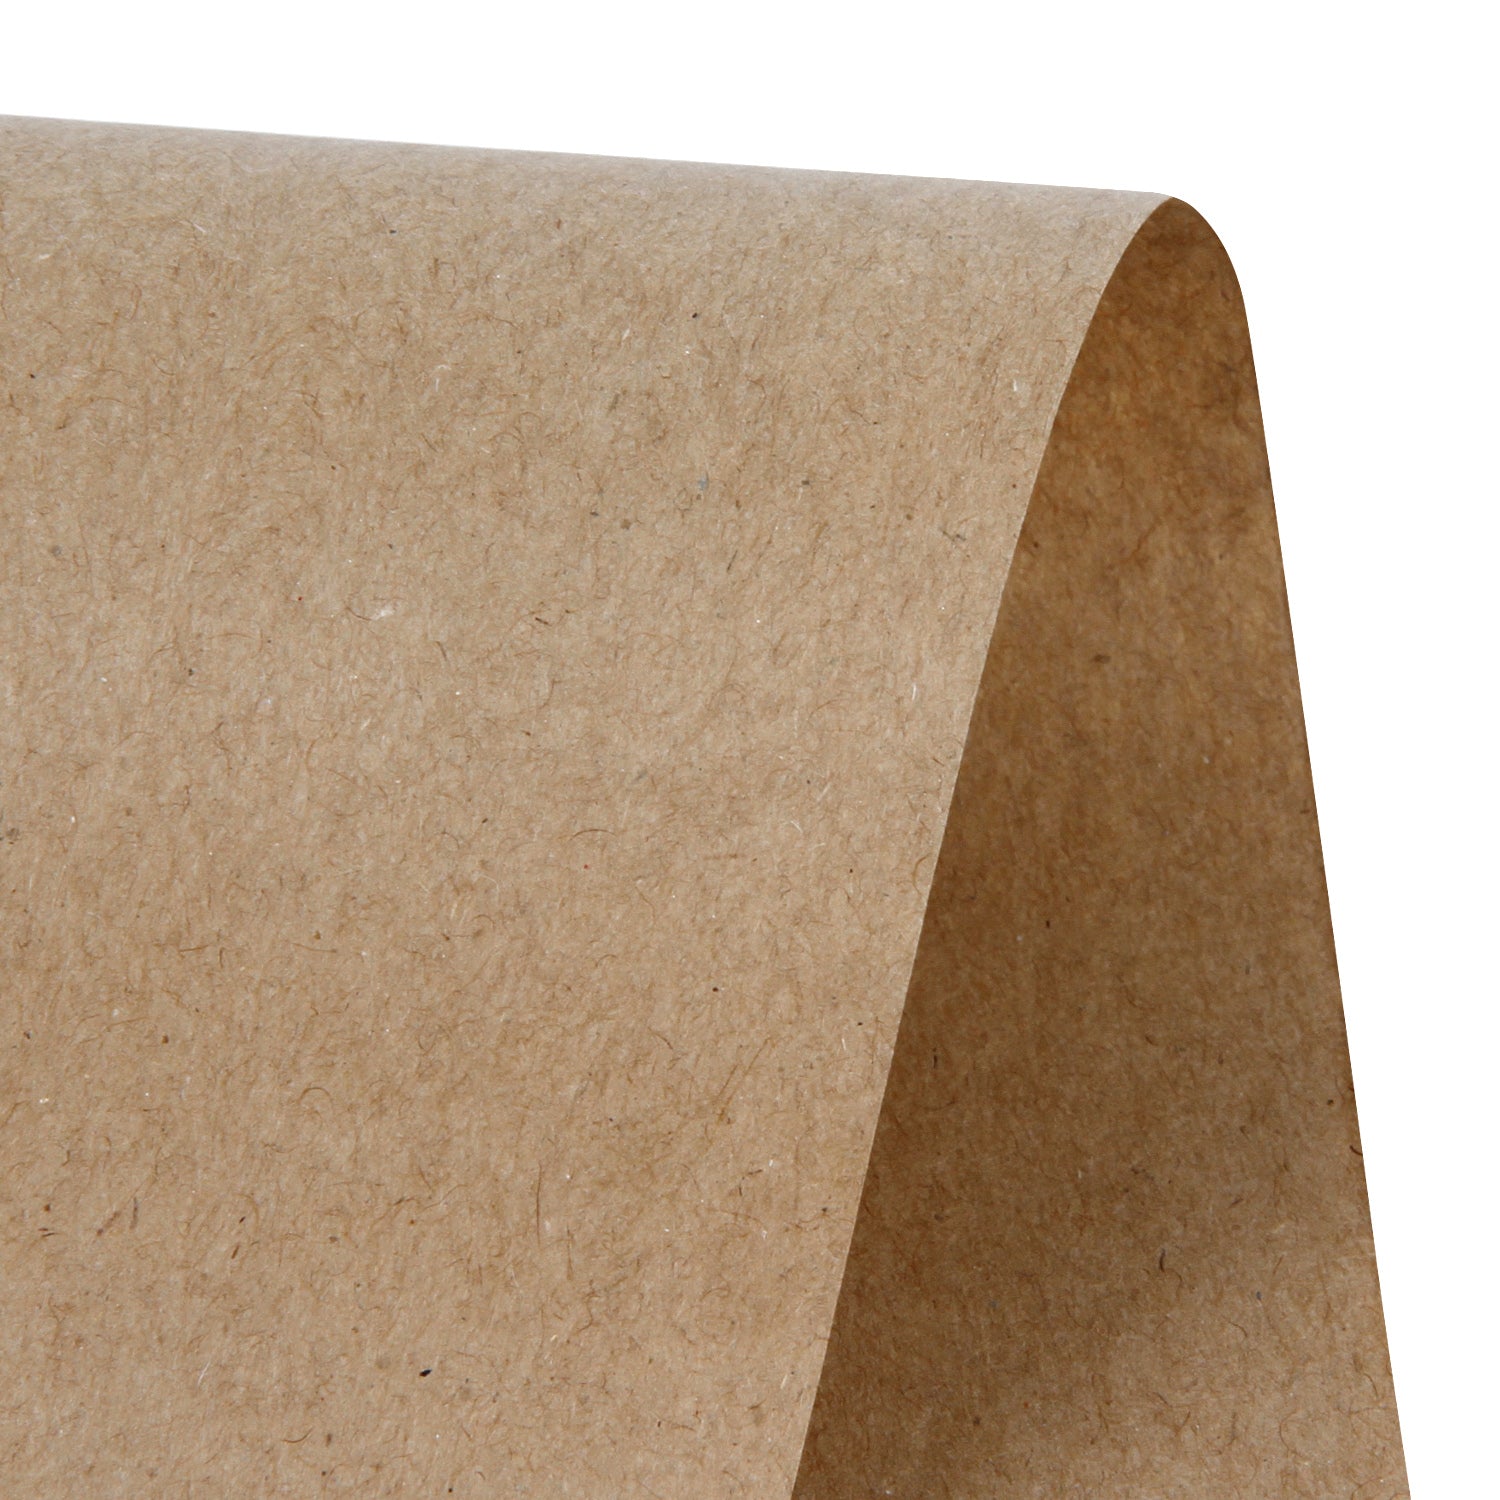  RUSPEPA Brown Kraft Paper Roll - 36 inches x 100 feet -  Recyclable Paper Perfect for Wrapping, Craft, Packing, Floor Covering,  Dunnage, Parcel, Table Runner : Health & Household